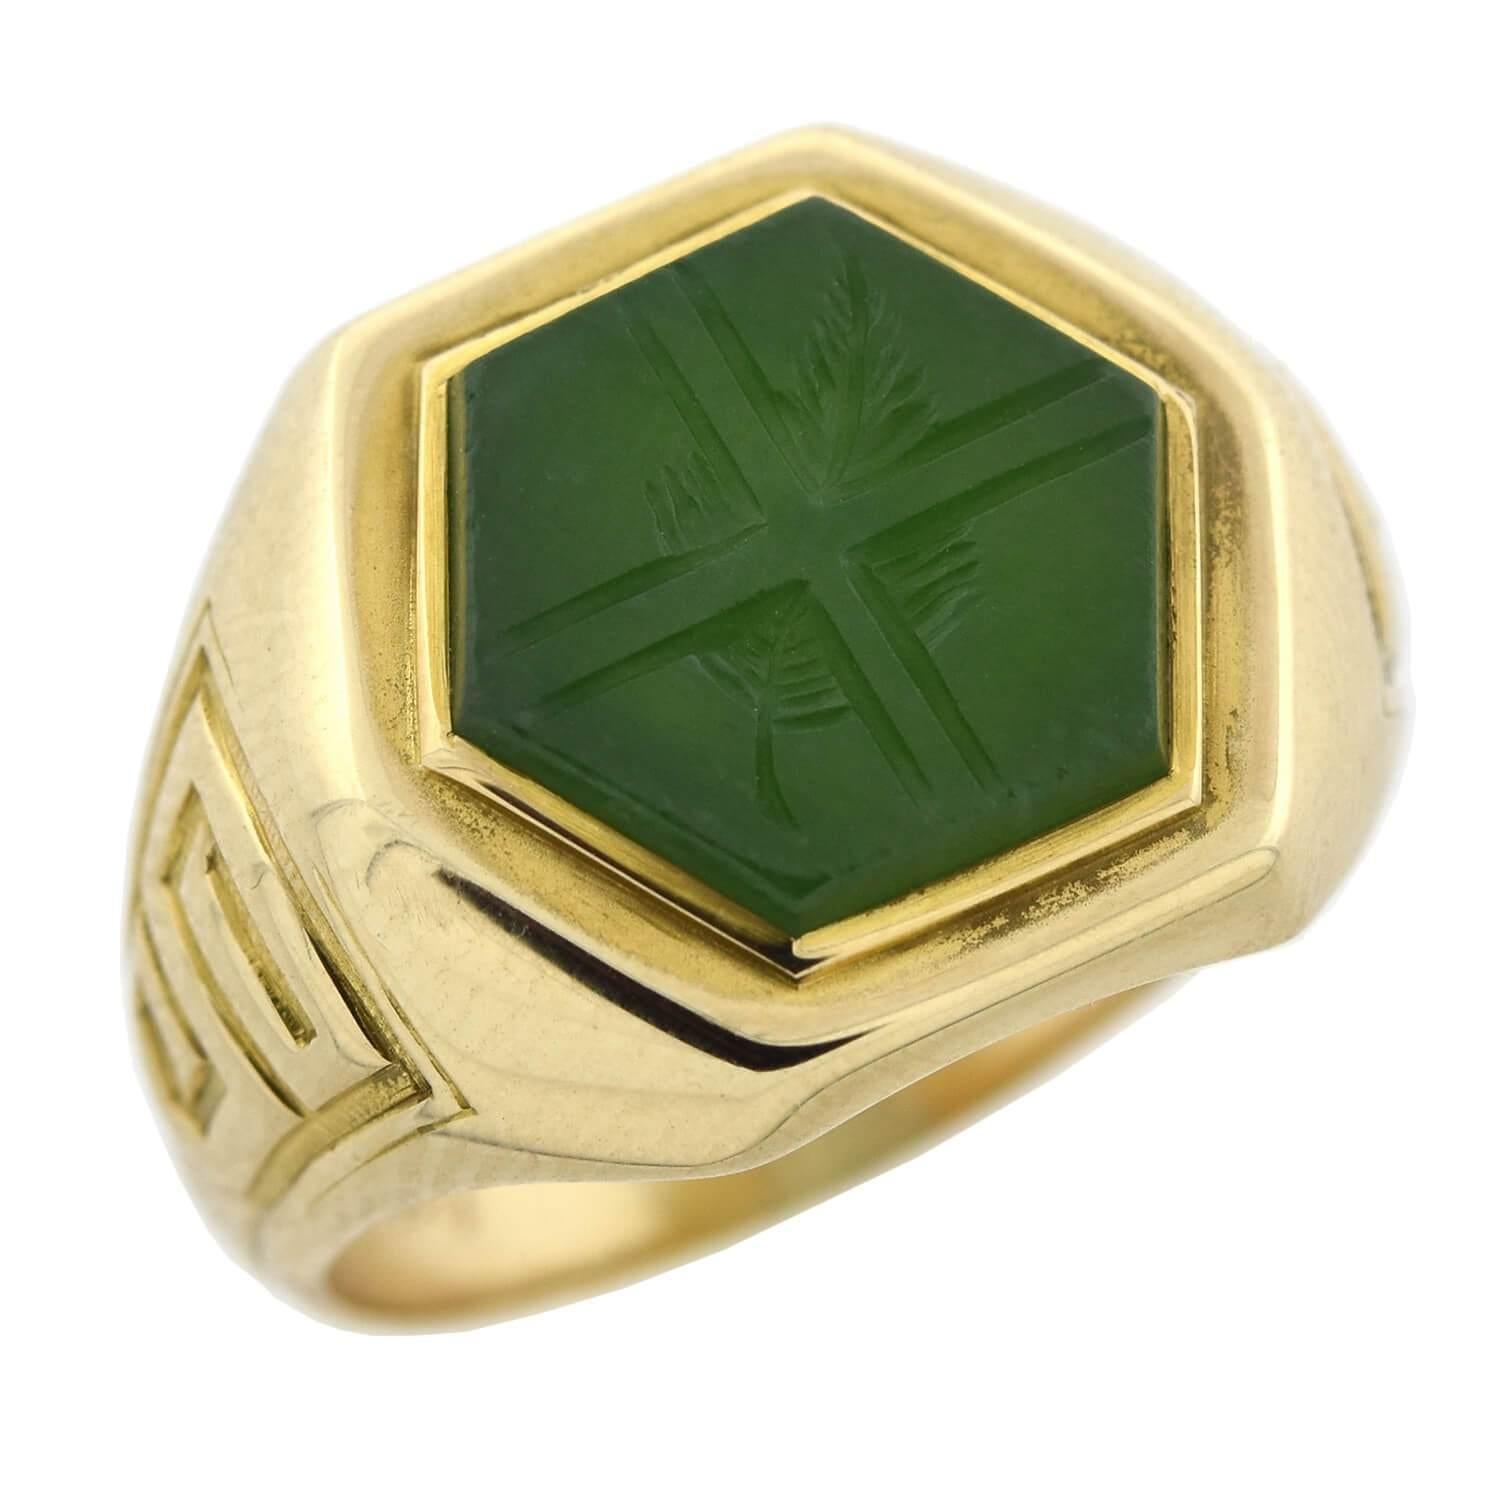 A signet ring can be represented with an intaglio, which is created by carving below the surface of a stone, or by a simple smooth seal. Its purpose would have been to seal the wax of a letter or note.

A stunning and unique intaglio signet ring